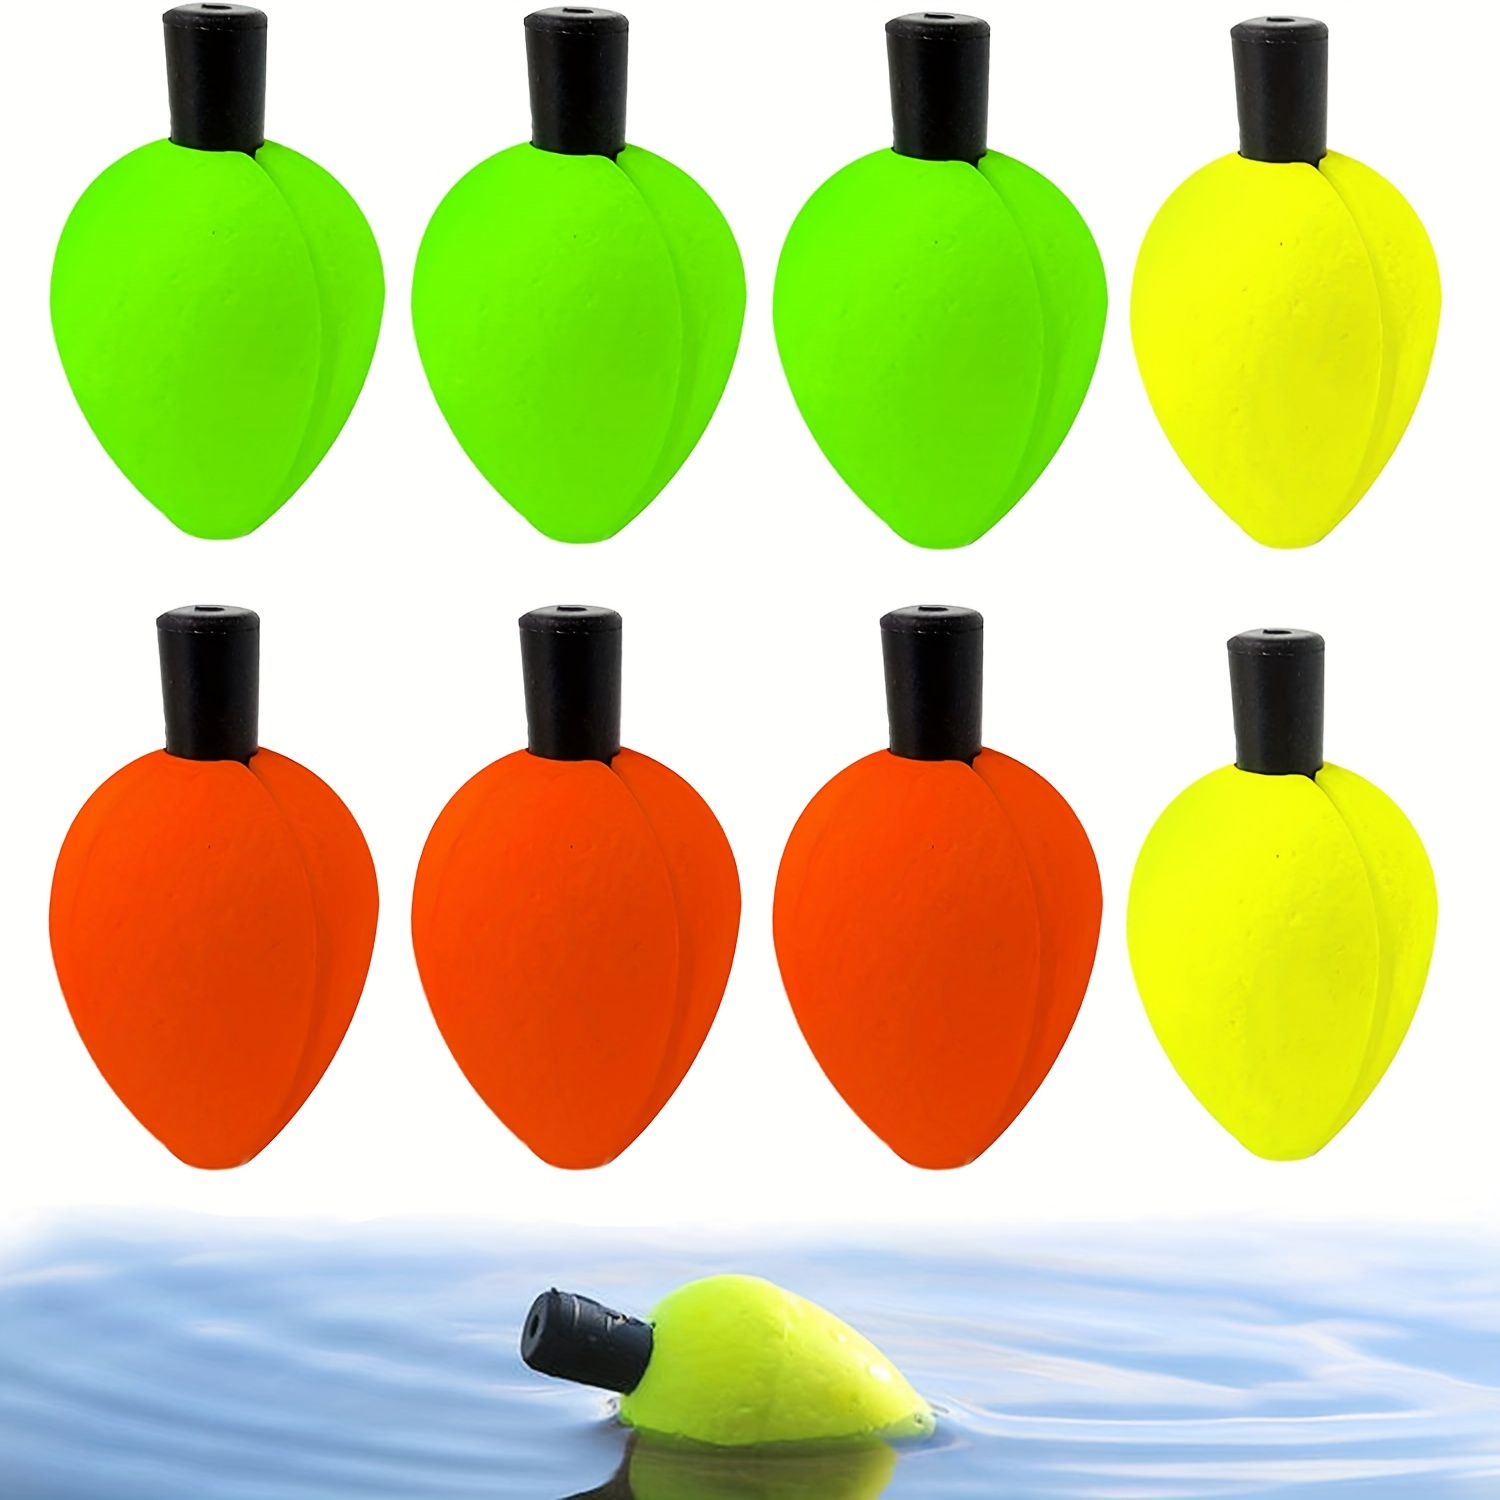 Estink Foam Slip Bobbers, Adjustable Fishing Bobber Floats For Sea Fishing For Crappie Bass Trout Fishing Self-Locking, 6x1.62x1.14 Inches Self-Lockin